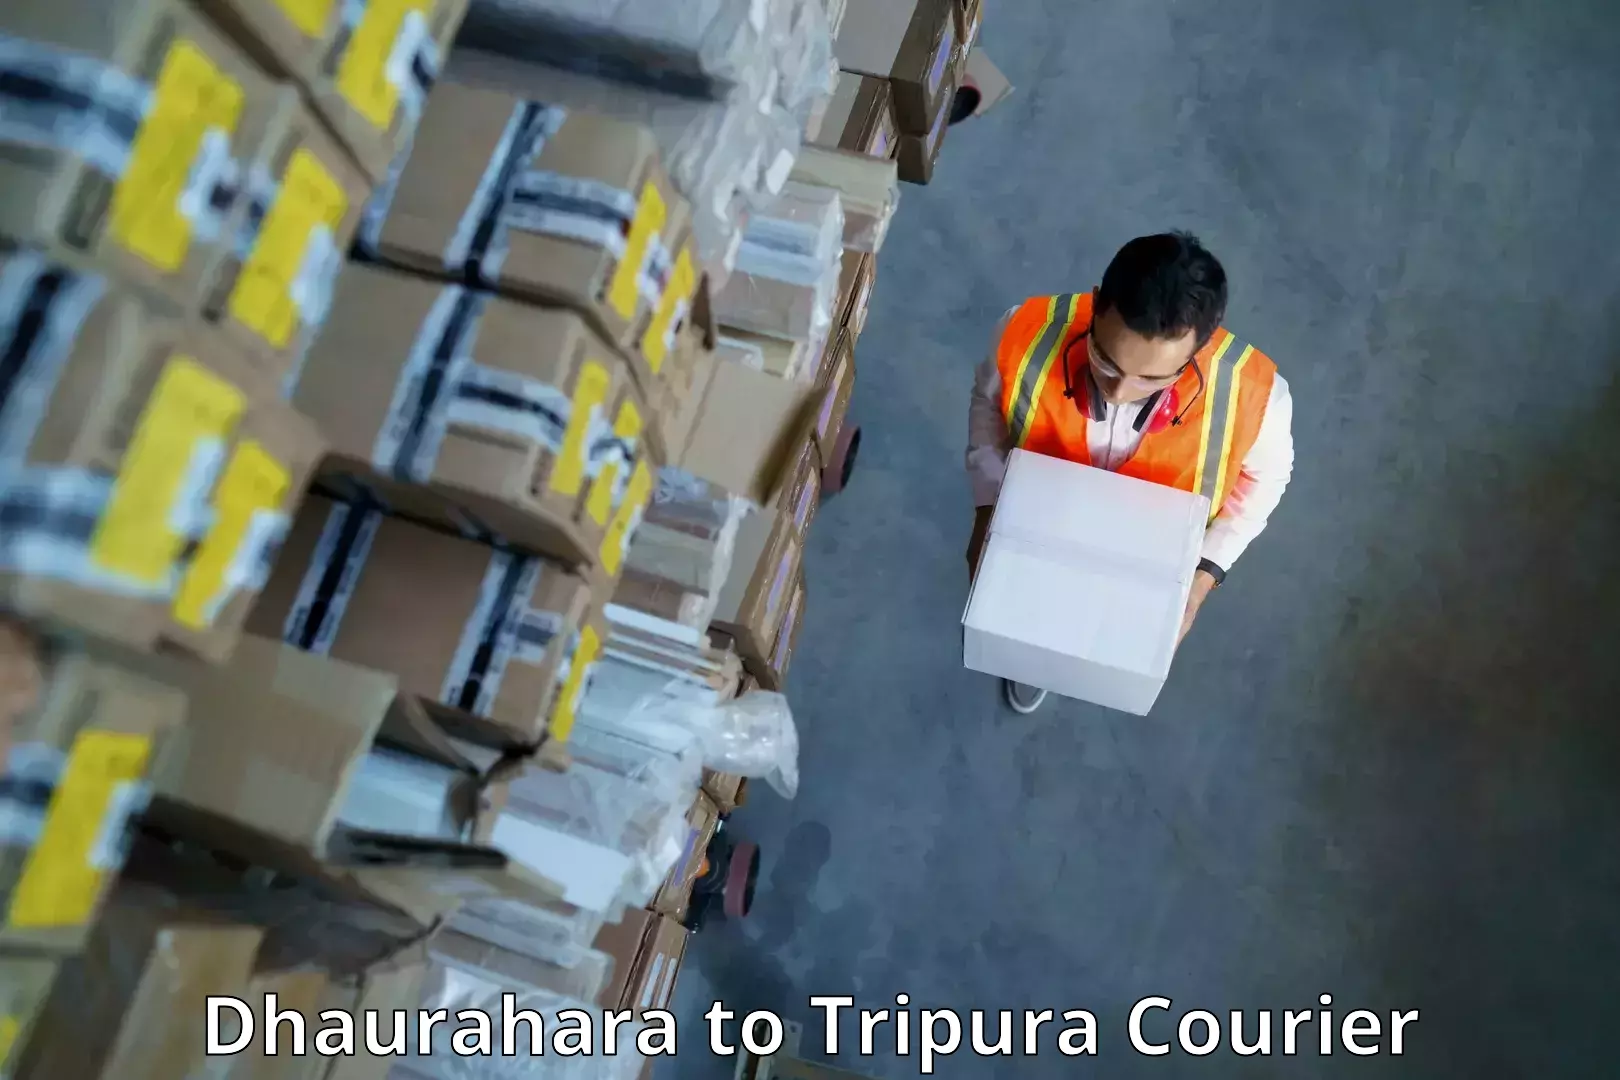 Global parcel delivery Dhaurahara to Udaipur Tripura